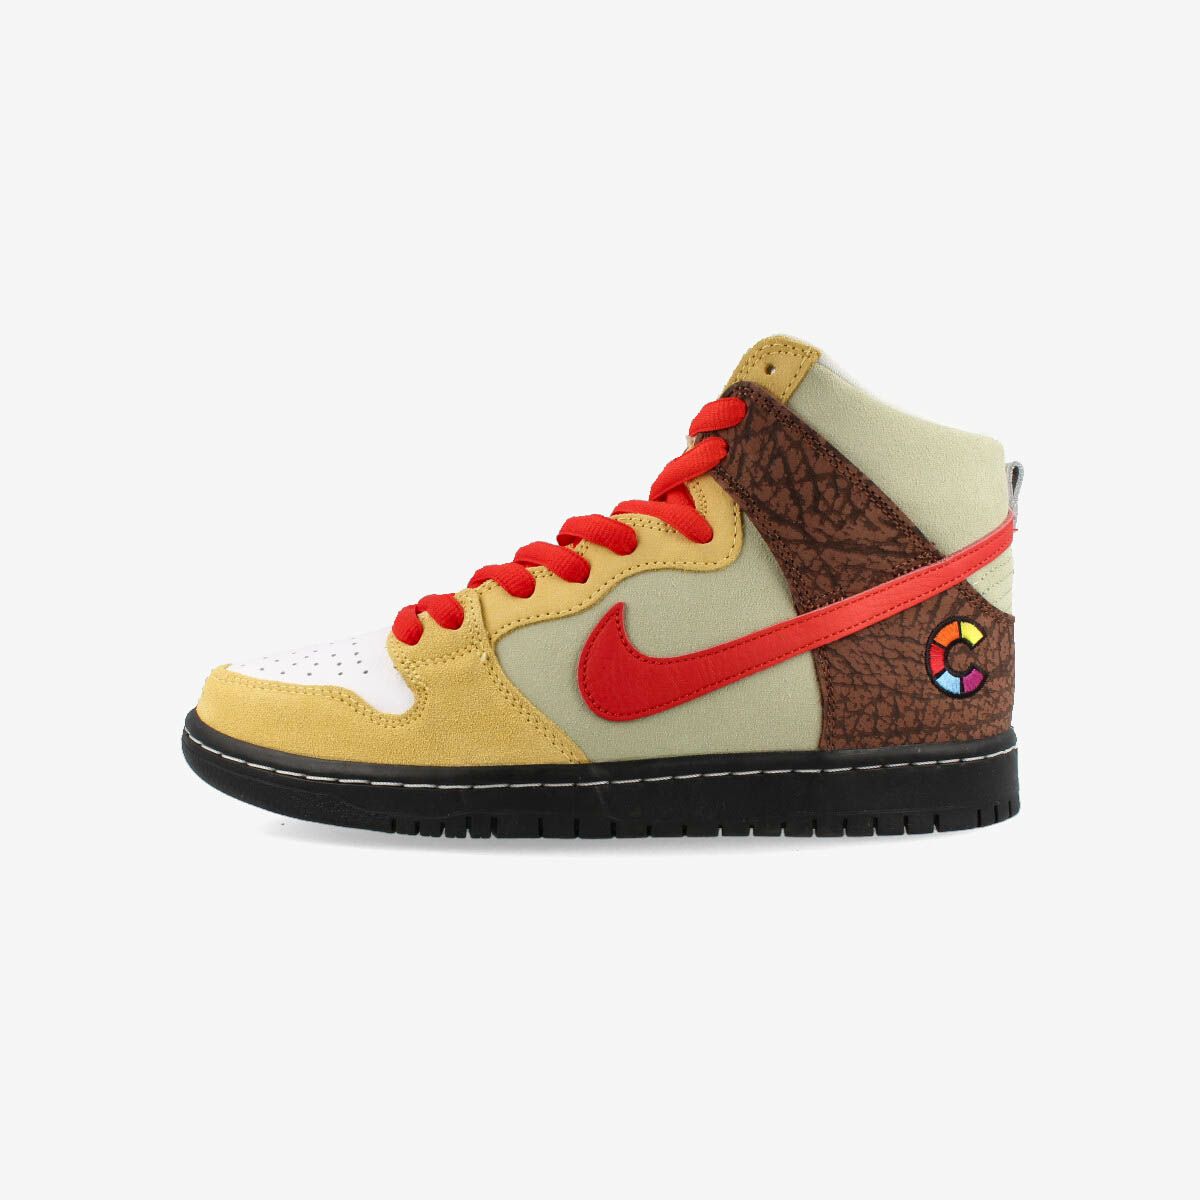 NIKE SB x COLOR SKATES DUNK HIGH PRO ISO TOPAZ GOLD/CHILI RED